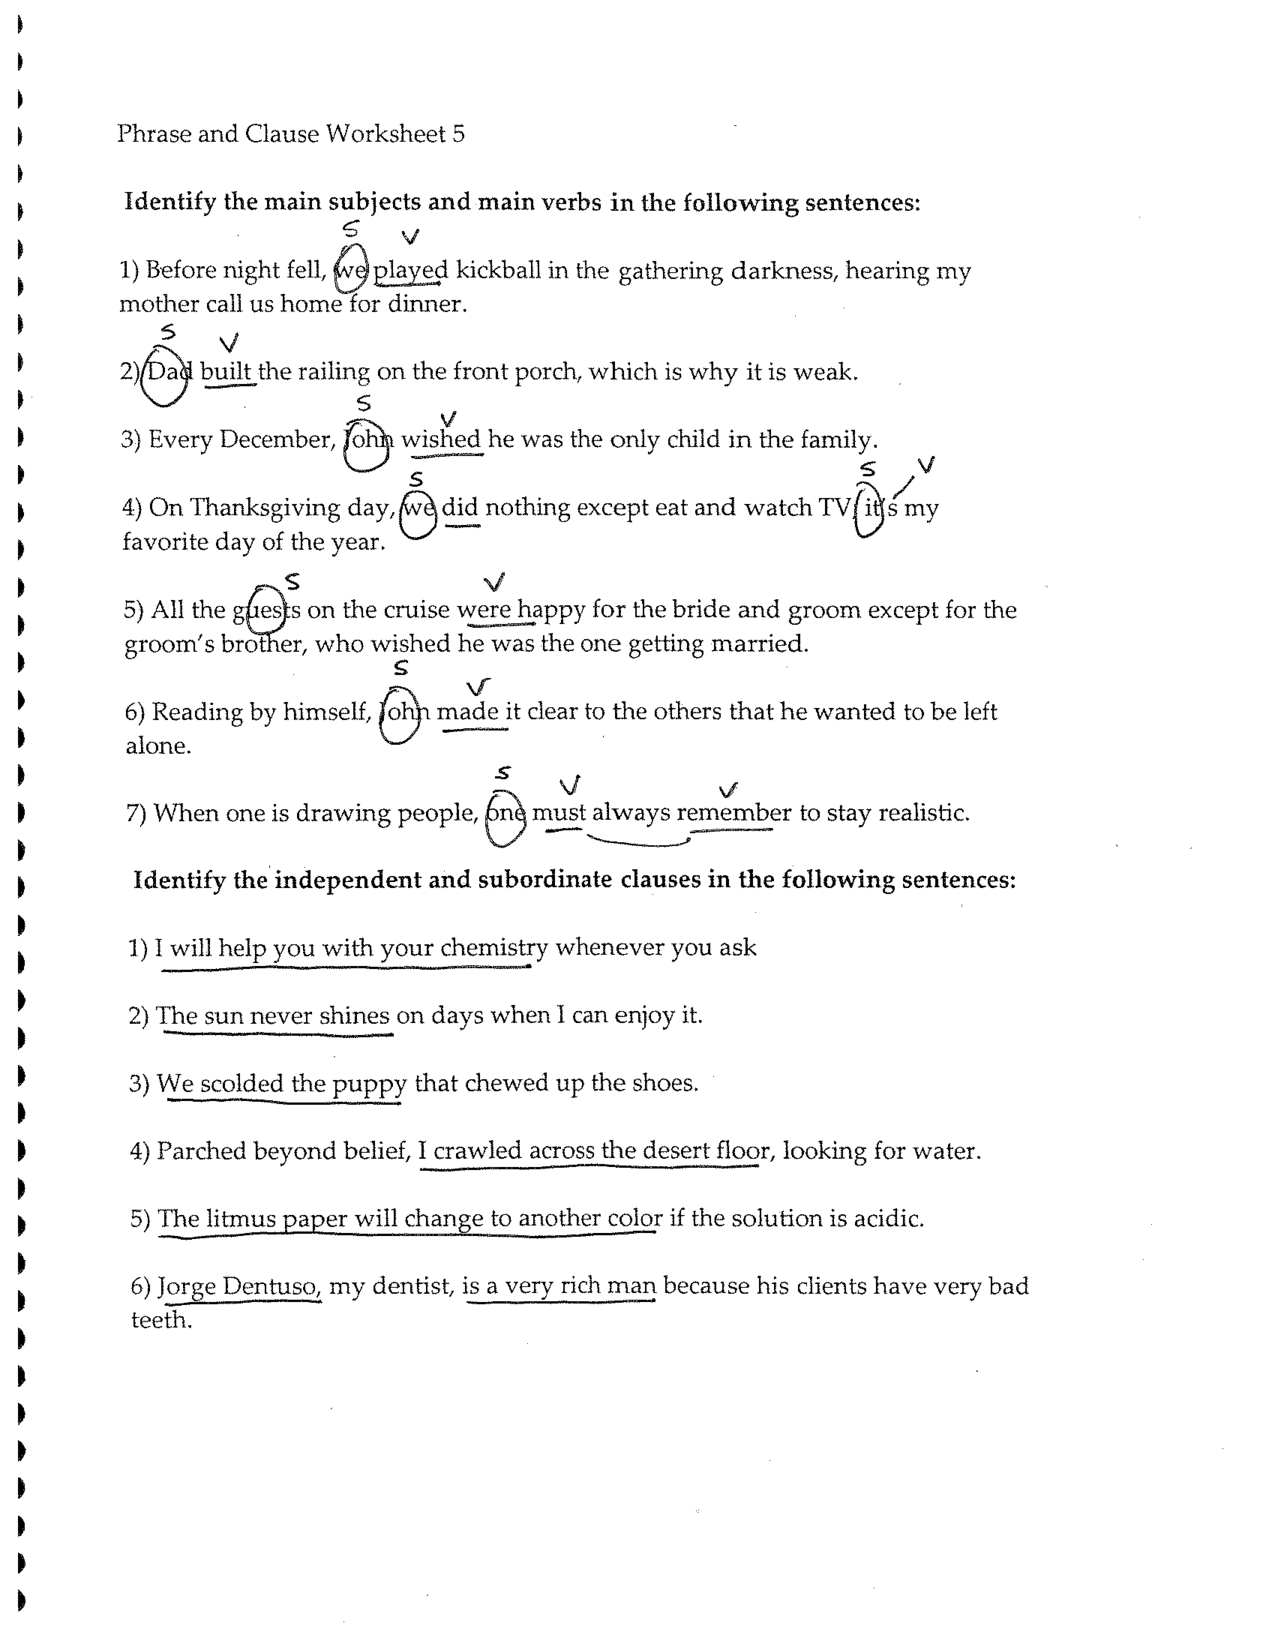 Independent and Dependent Clauses Worksheets Image